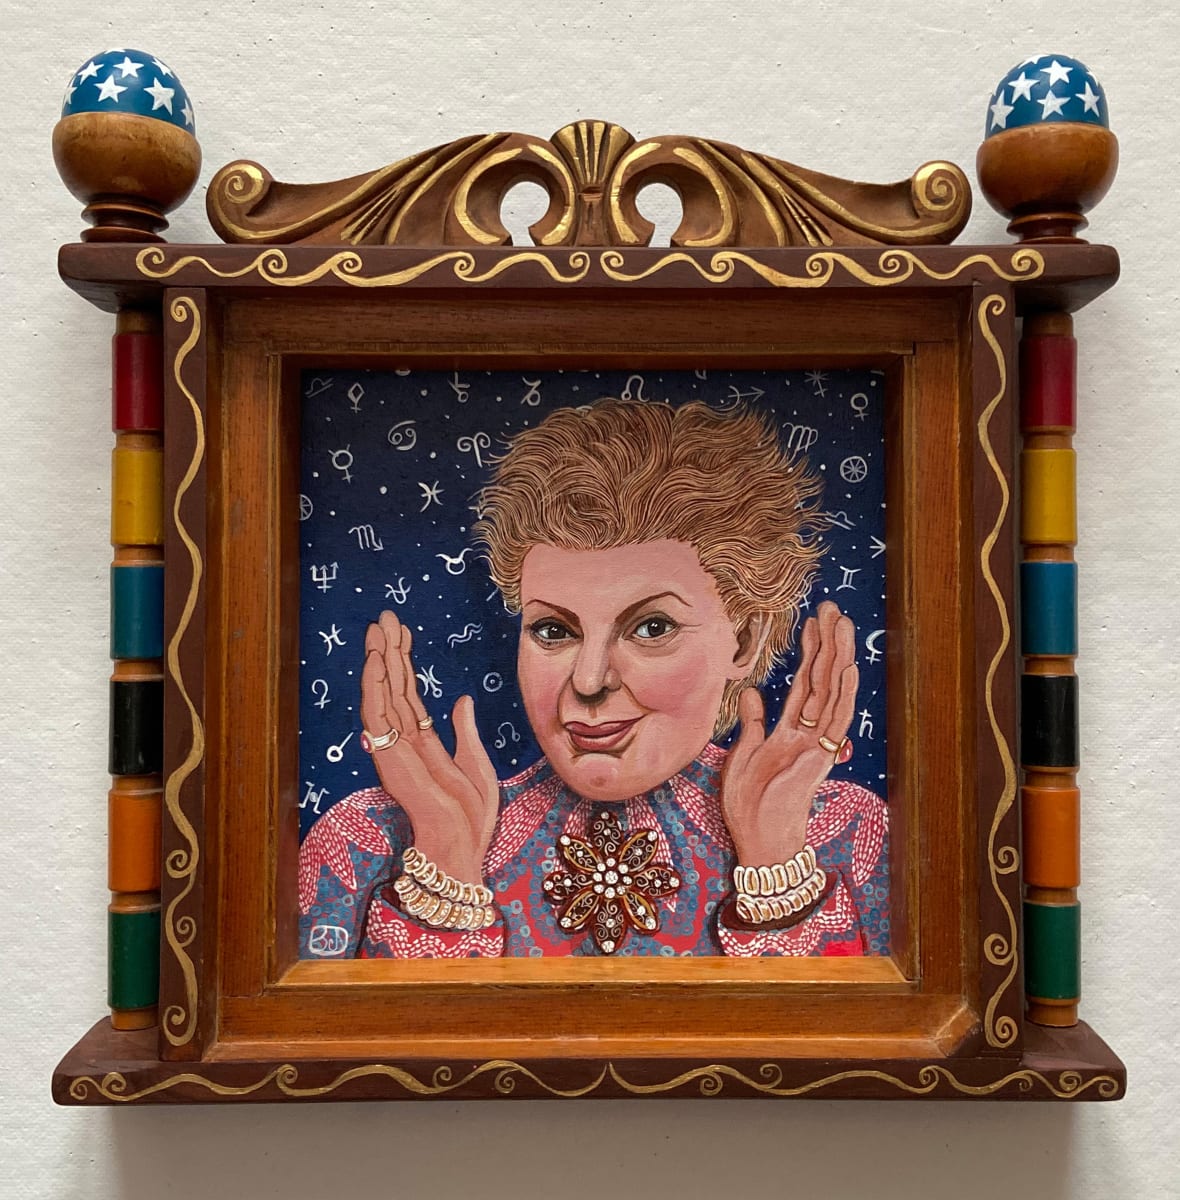 Mucho Mucho Amor: Portrait of Walter Mercado  Image: Portrait of Puerto Rican astrology star, Walter Mercado-the subject of a recent documentary.